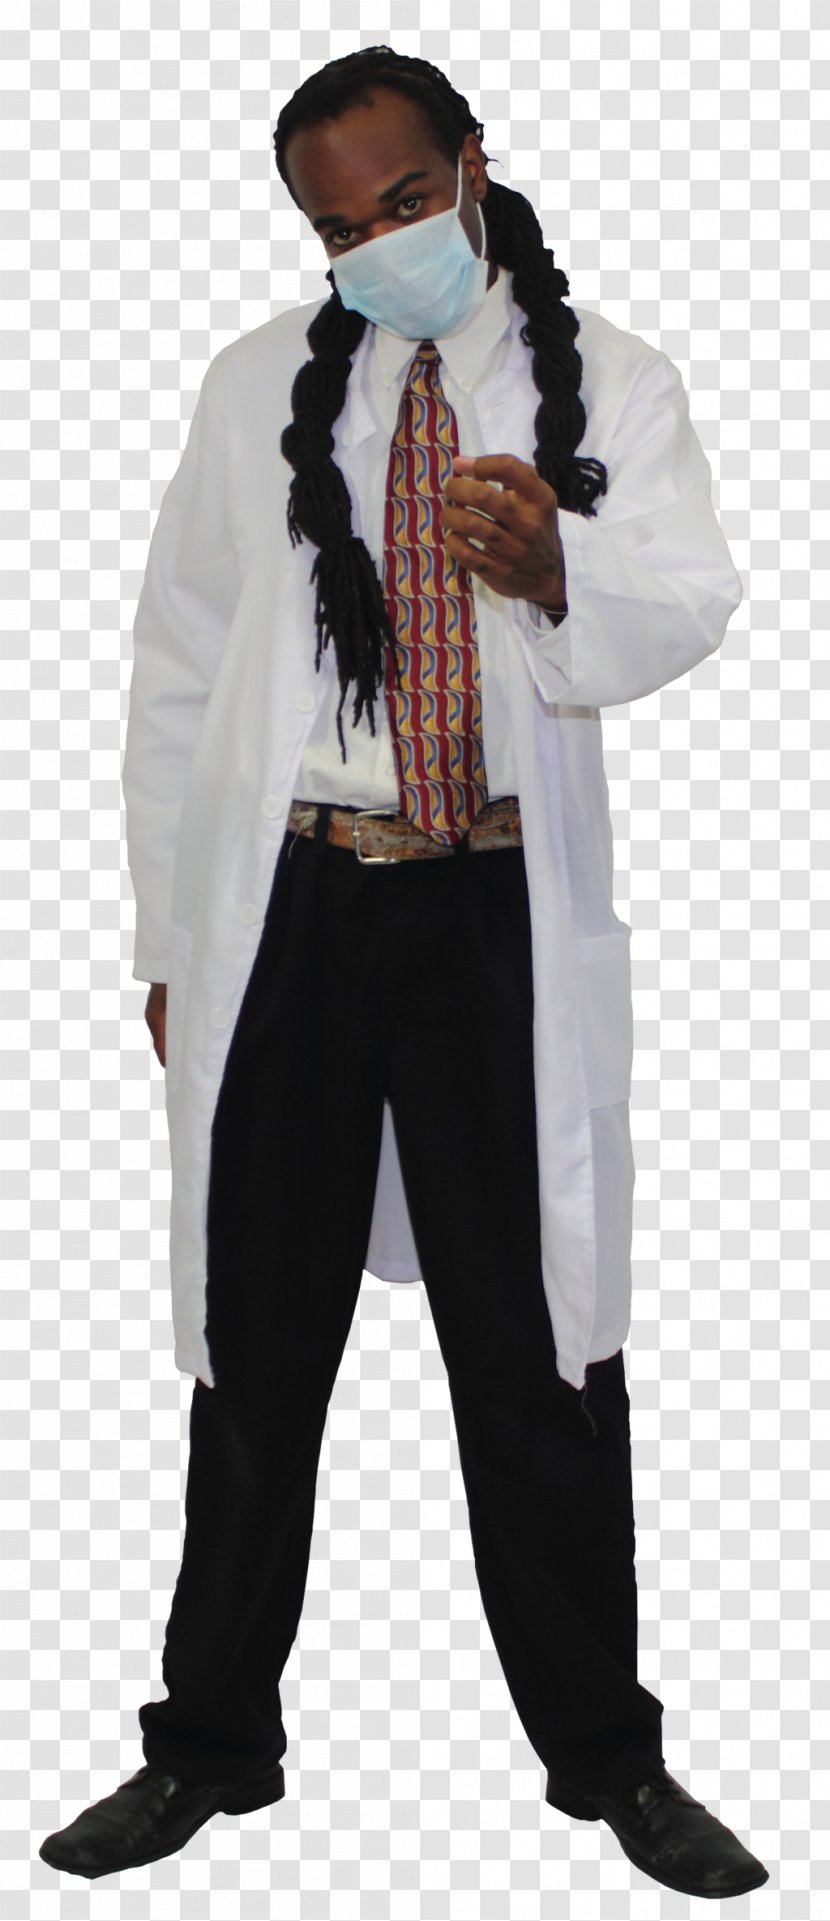 Costume - Outerwear - Mad Scientist Transparent PNG